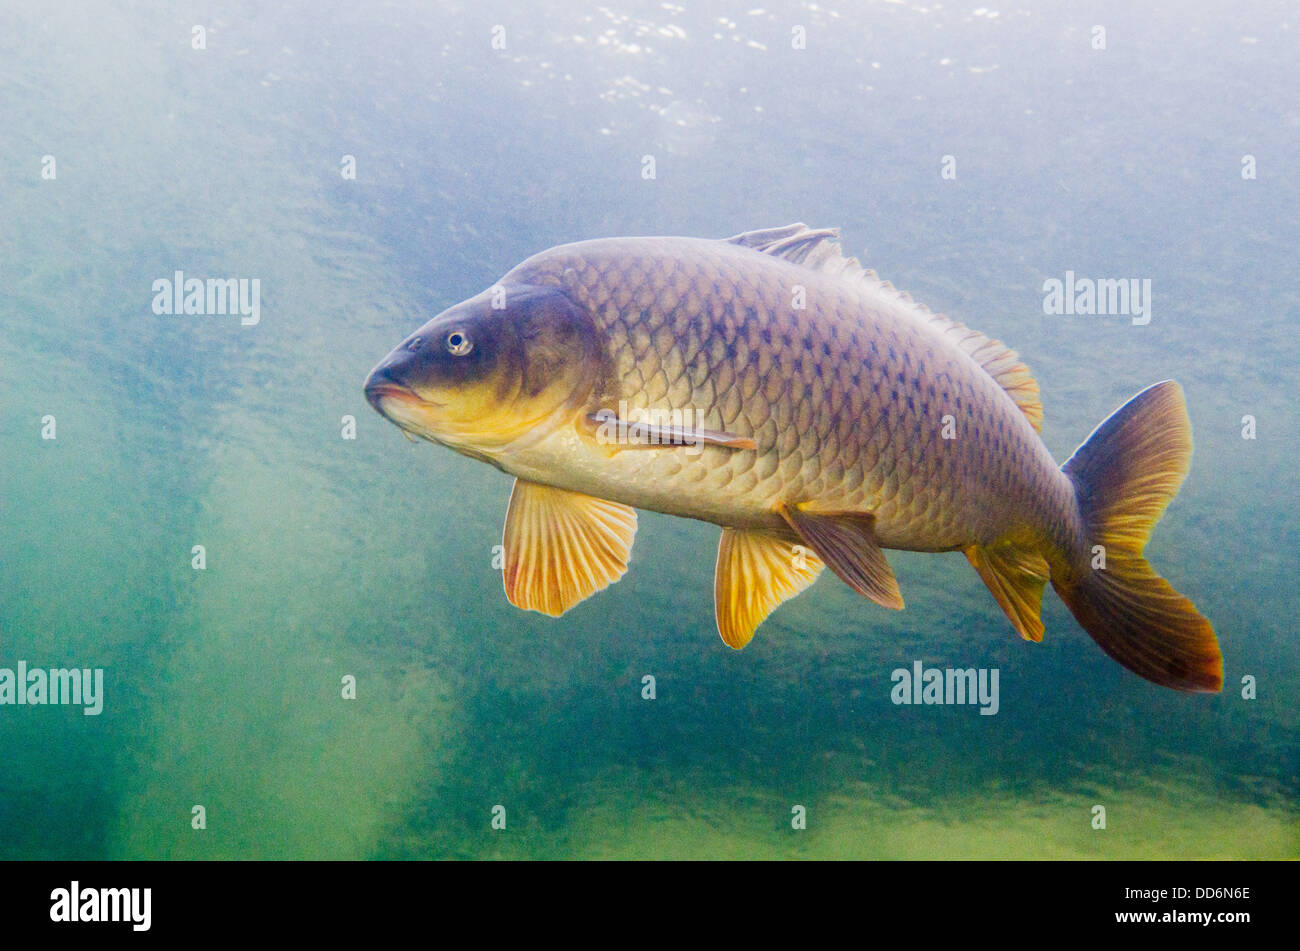 Common Carp fish swimming near the surface of the water Stock